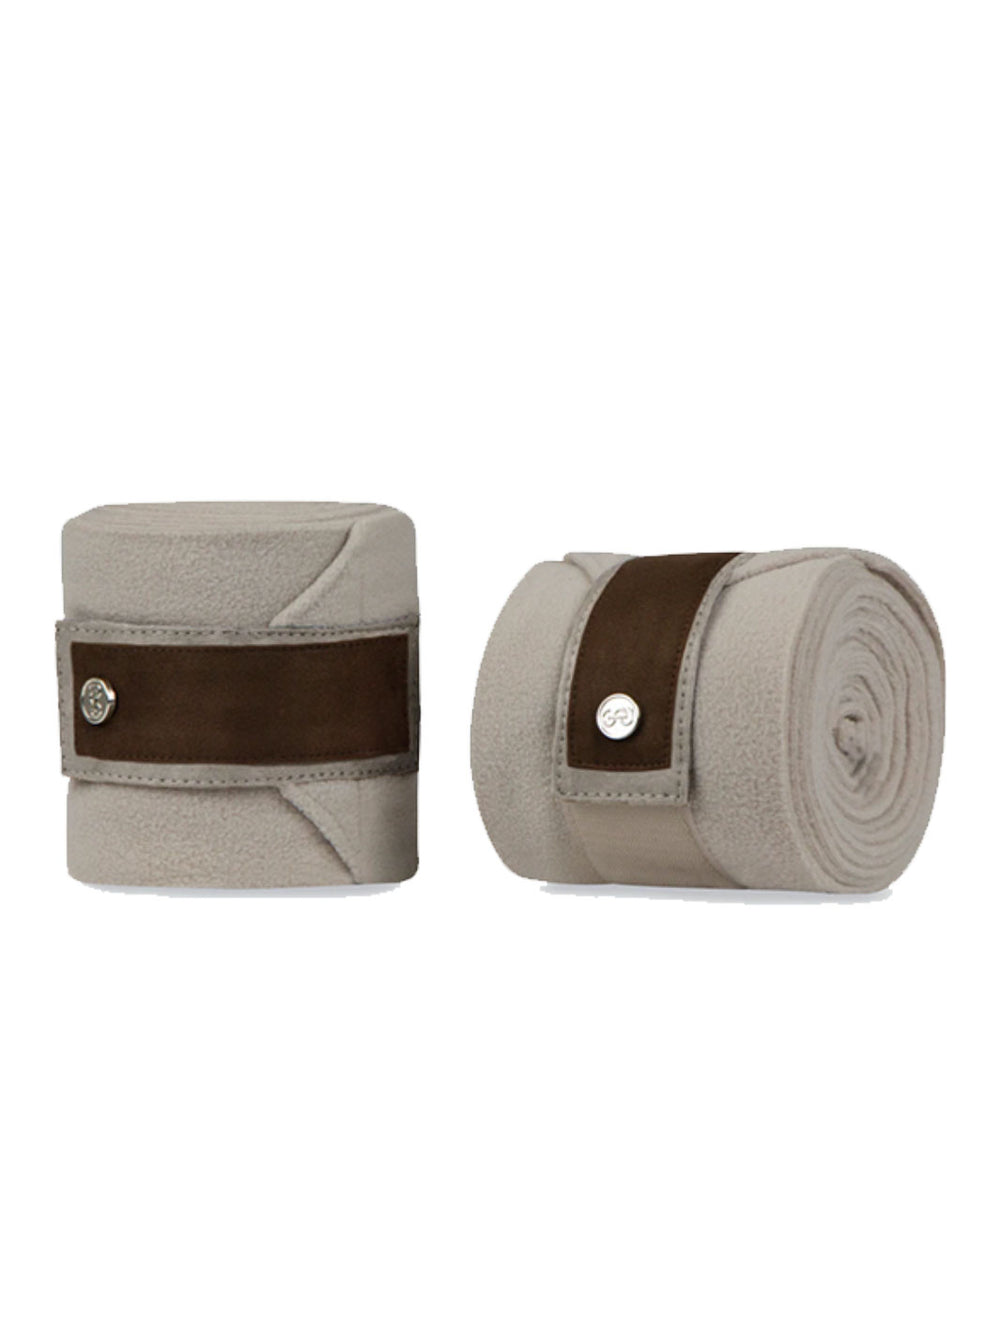 PSOS  Brown Suede Trim Latte Dressage pad and Polo Set